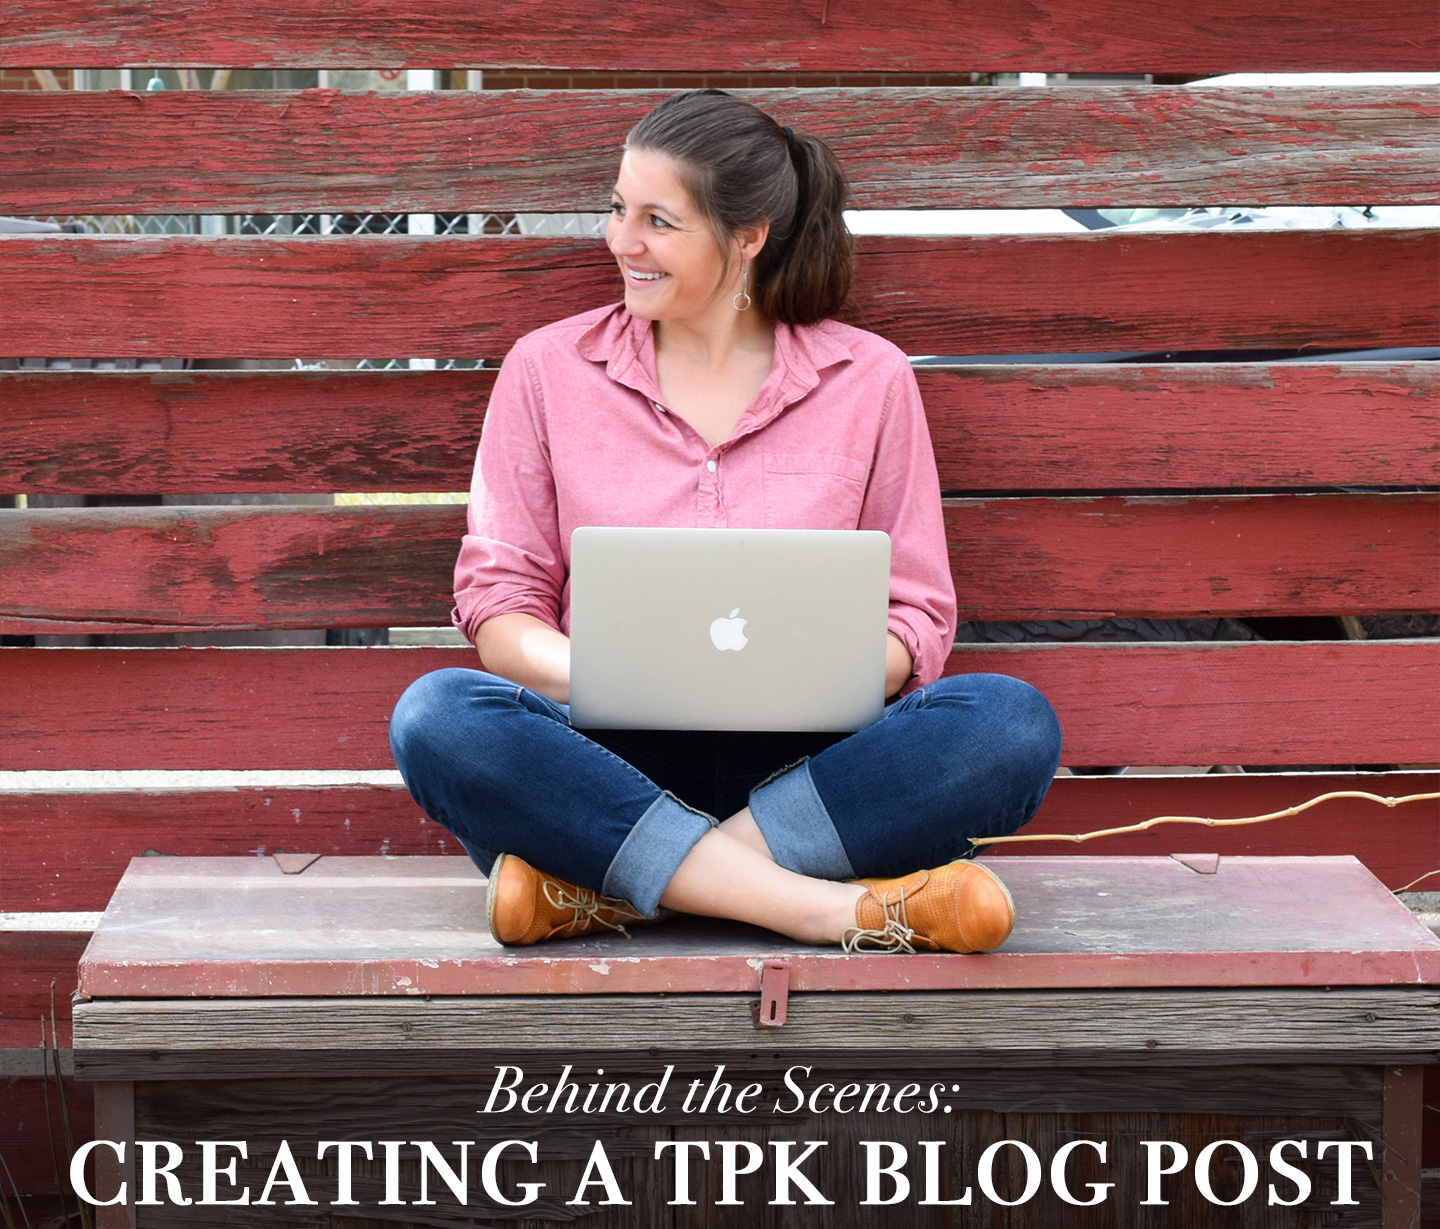 Behind the Scenes: Creating a TPK Blog Post